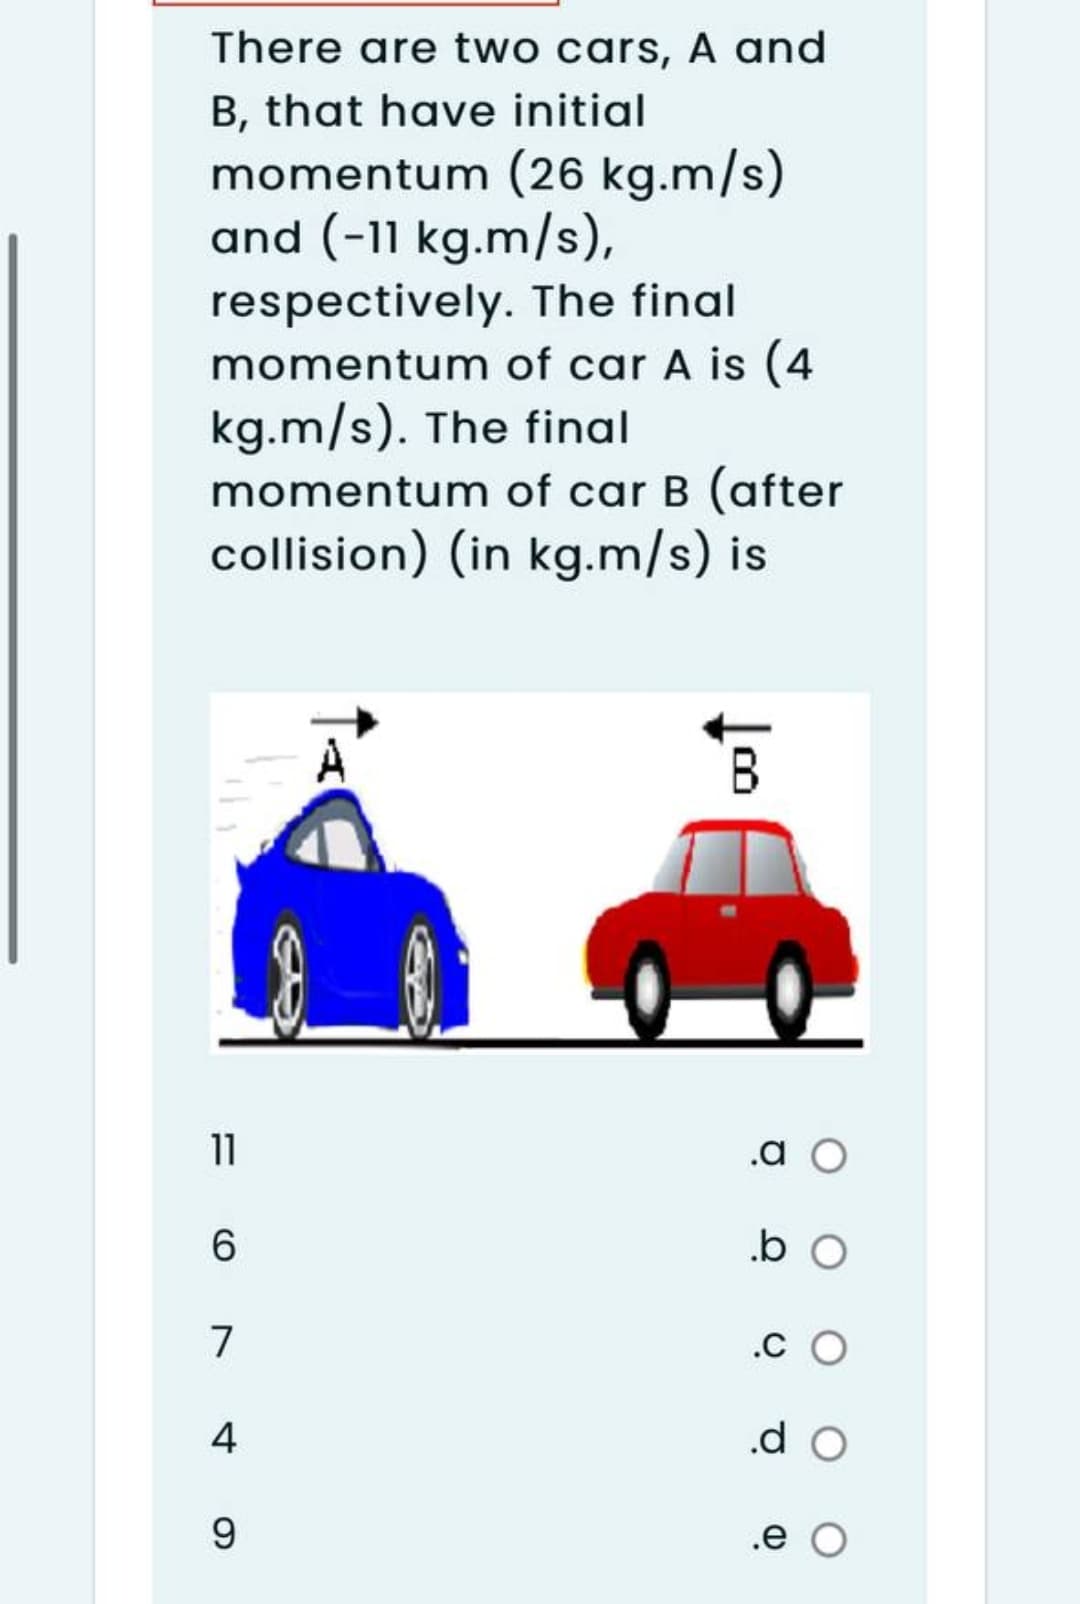 There are two cars, A and
B, that have initial
momentum (26 kg.m/s)
and (-11 kg.m/s),
respectively. The final
momentum of car A is (4
kg.m/s). The final
momentum of car B (after
collision) (in kg.m/s) is
B.
11
.a
6.
.b o
7
.C O
4
.d o
9.
.e O
